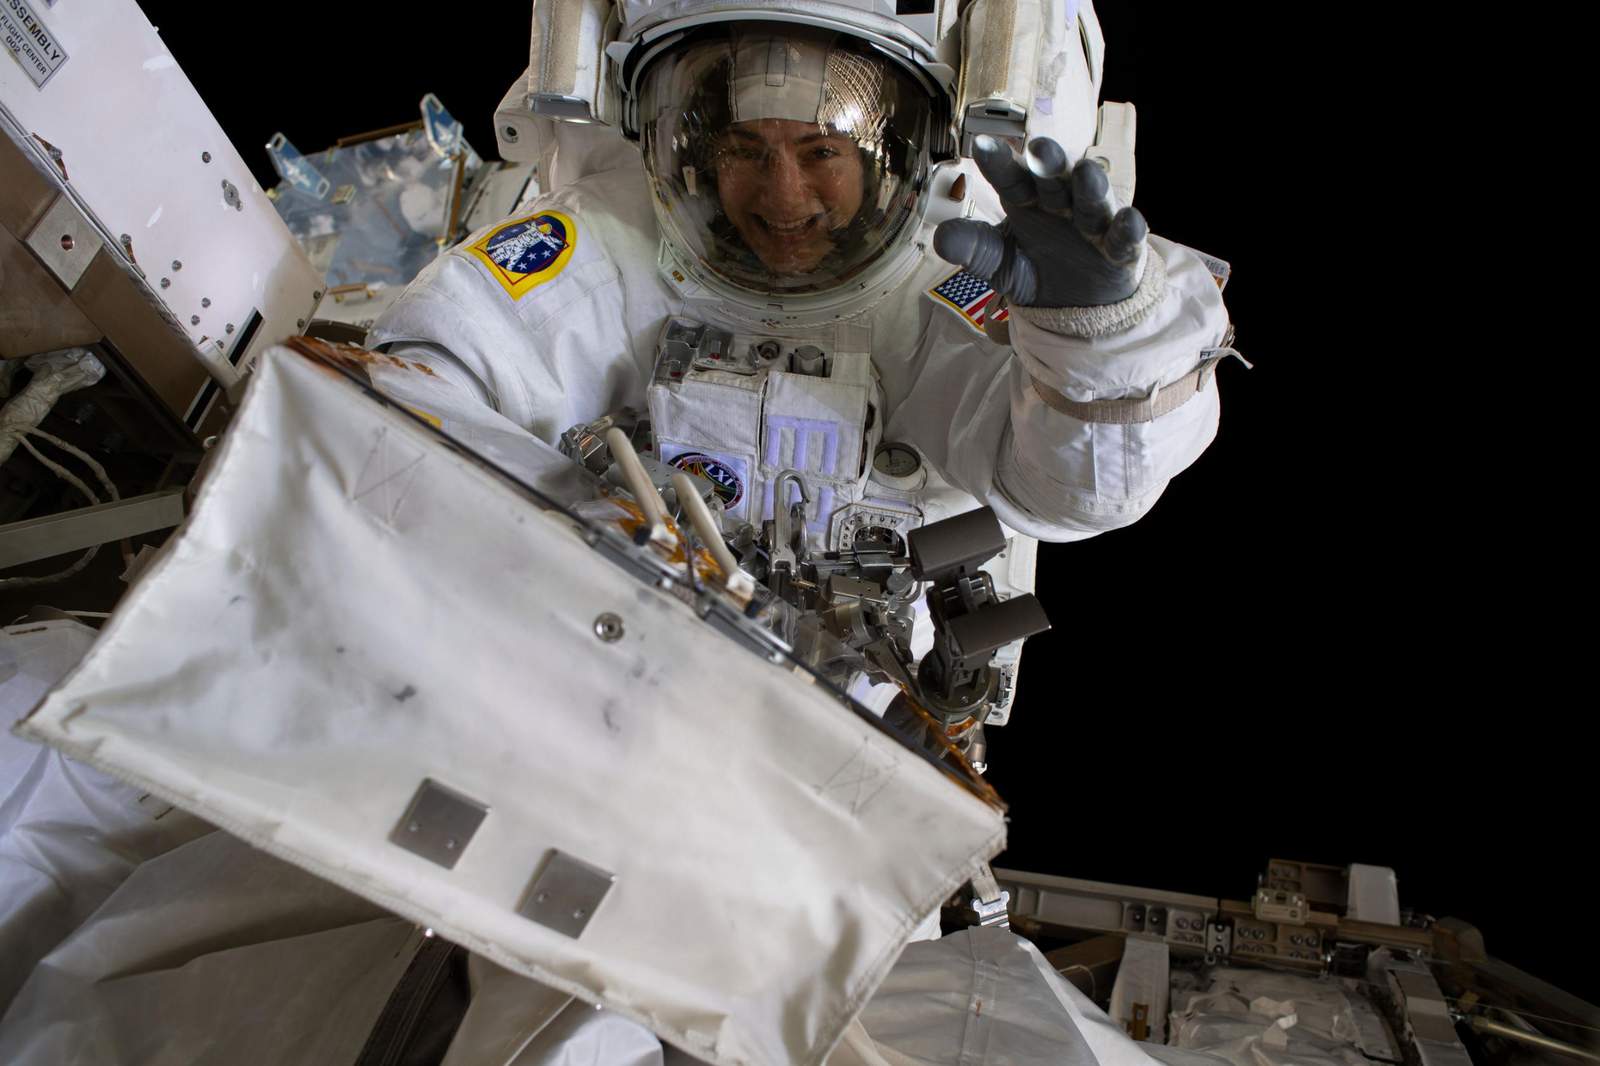 Second all-female spacewalk briefly hampered by helmet issue